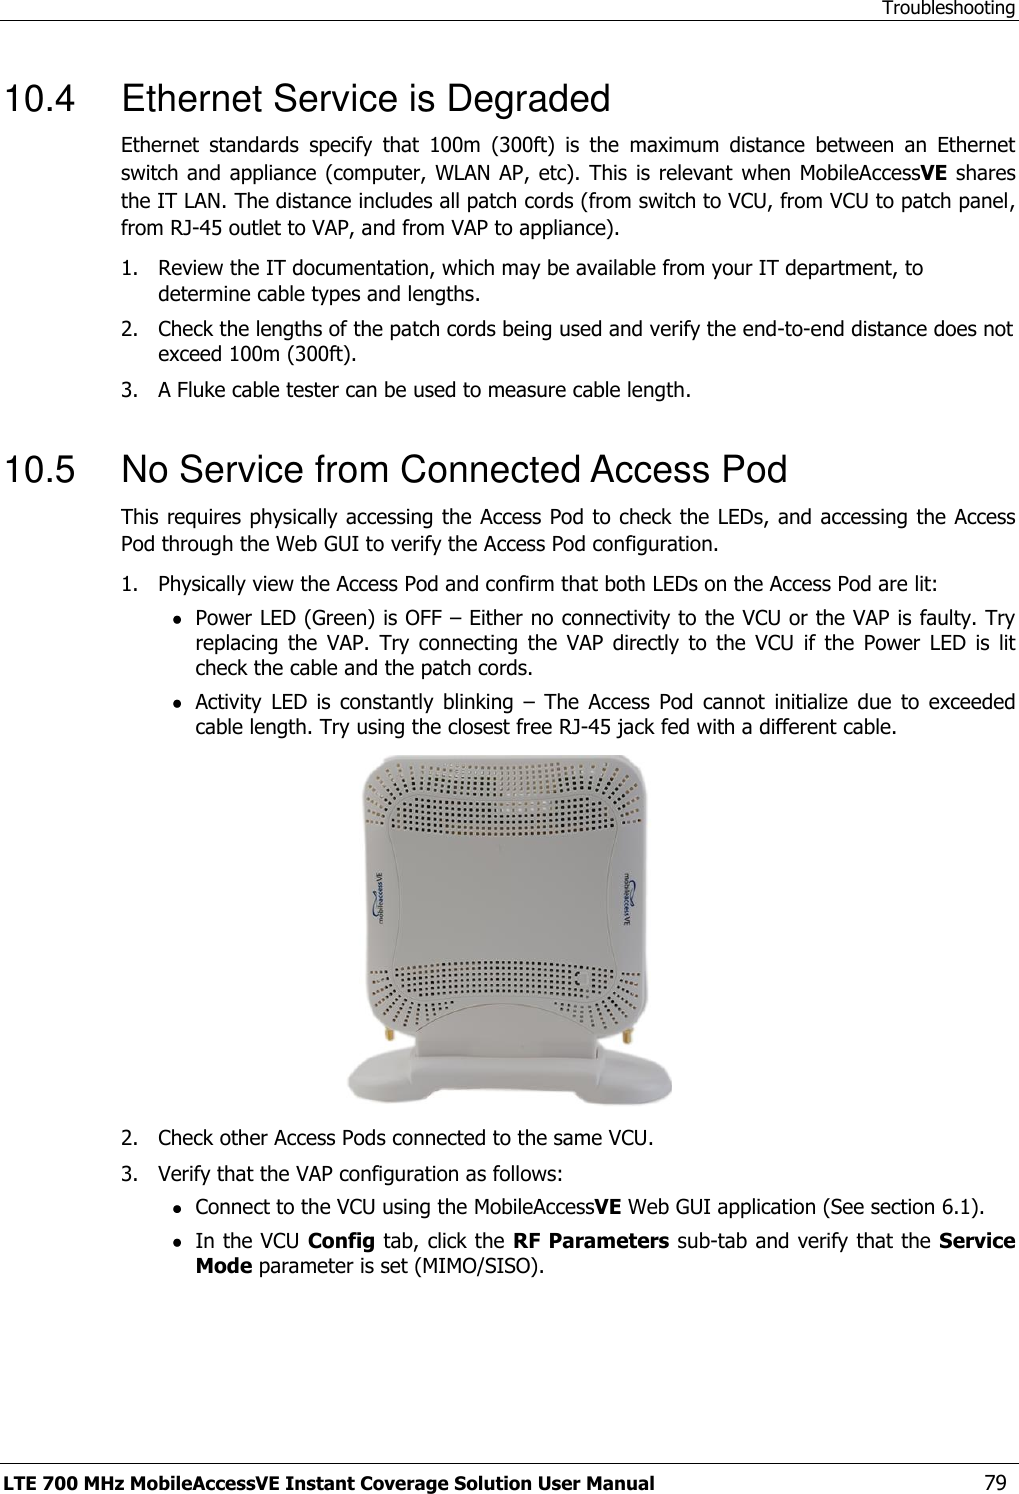 Troubleshooting LTE 700 MHz MobileAccessVE Instant Coverage Solution User Manual  79 10.4  Ethernet Service is Degraded Ethernet  standards  specify  that  100m  (300ft)  is  the  maximum  distance  between  an  Ethernet switch and appliance (computer,  WLAN AP, etc). This is relevant  when MobileAccessVE shares the IT LAN. The distance includes all patch cords (from switch to VCU, from VCU to patch panel, from RJ-45 outlet to VAP, and from VAP to appliance).  1.  Review the IT documentation, which may be available from your IT department, to determine cable types and lengths. 2.  Check the lengths of the patch cords being used and verify the end-to-end distance does not exceed 100m (300ft). 3.  A Fluke cable tester can be used to measure cable length.  10.5  No Service from Connected Access Pod This requires physically accessing the Access Pod to check the LEDs, and accessing the Access Pod through the Web GUI to verify the Access Pod configuration.  1.  Physically view the Access Pod and confirm that both LEDs on the Access Pod are lit:  Power LED (Green) is OFF – Either no connectivity to the VCU or the VAP is faulty. Try replacing  the  VAP.  Try  connecting  the  VAP  directly  to  the  VCU  if  the  Power  LED  is  lit check the cable and the patch cords.  Activity  LED  is  constantly  blinking  –  The  Access  Pod  cannot  initialize  due  to  exceeded cable length. Try using the closest free RJ-45 jack fed with a different cable.  2.  Check other Access Pods connected to the same VCU. 3.  Verify that the VAP configuration as follows:  Connect to the VCU using the MobileAccessVE Web GUI application (See section 6.1).  In the VCU Config tab, click the RF Parameters sub-tab and verify that the Service Mode parameter is set (MIMO/SISO). 